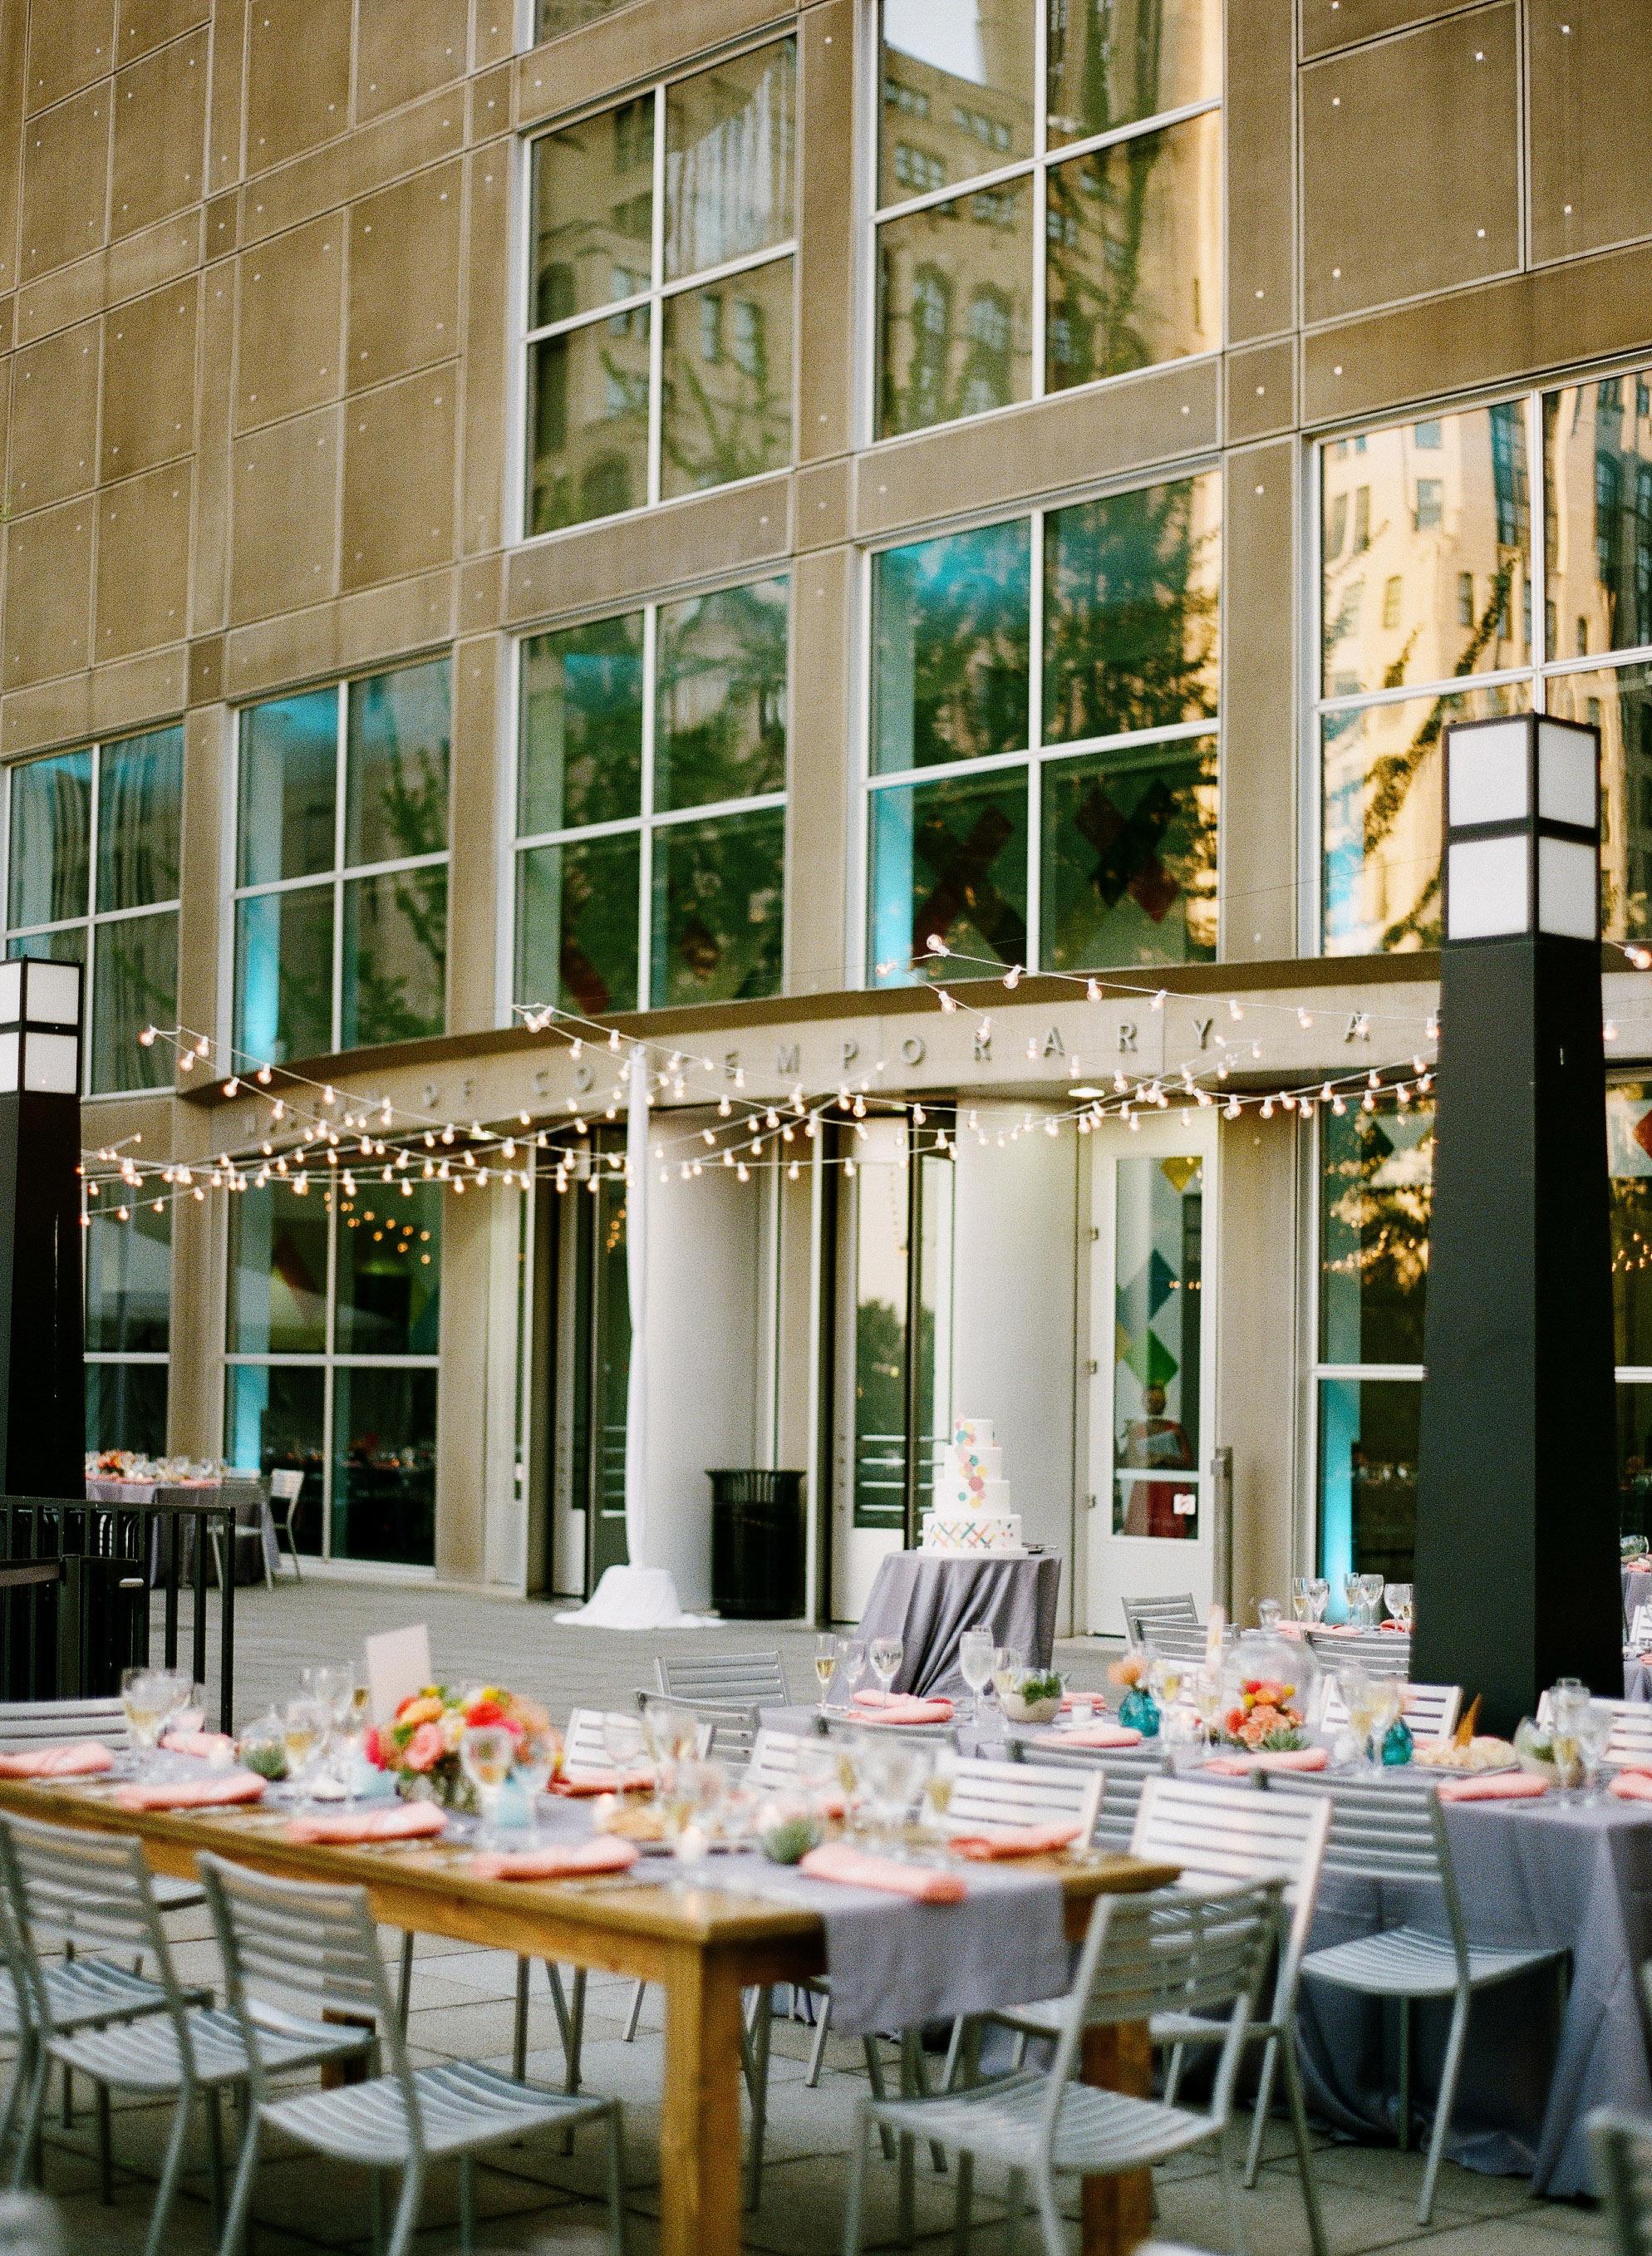 The MCA terrace is decorated with banquet tables, decorative lights, and a wedding cake.